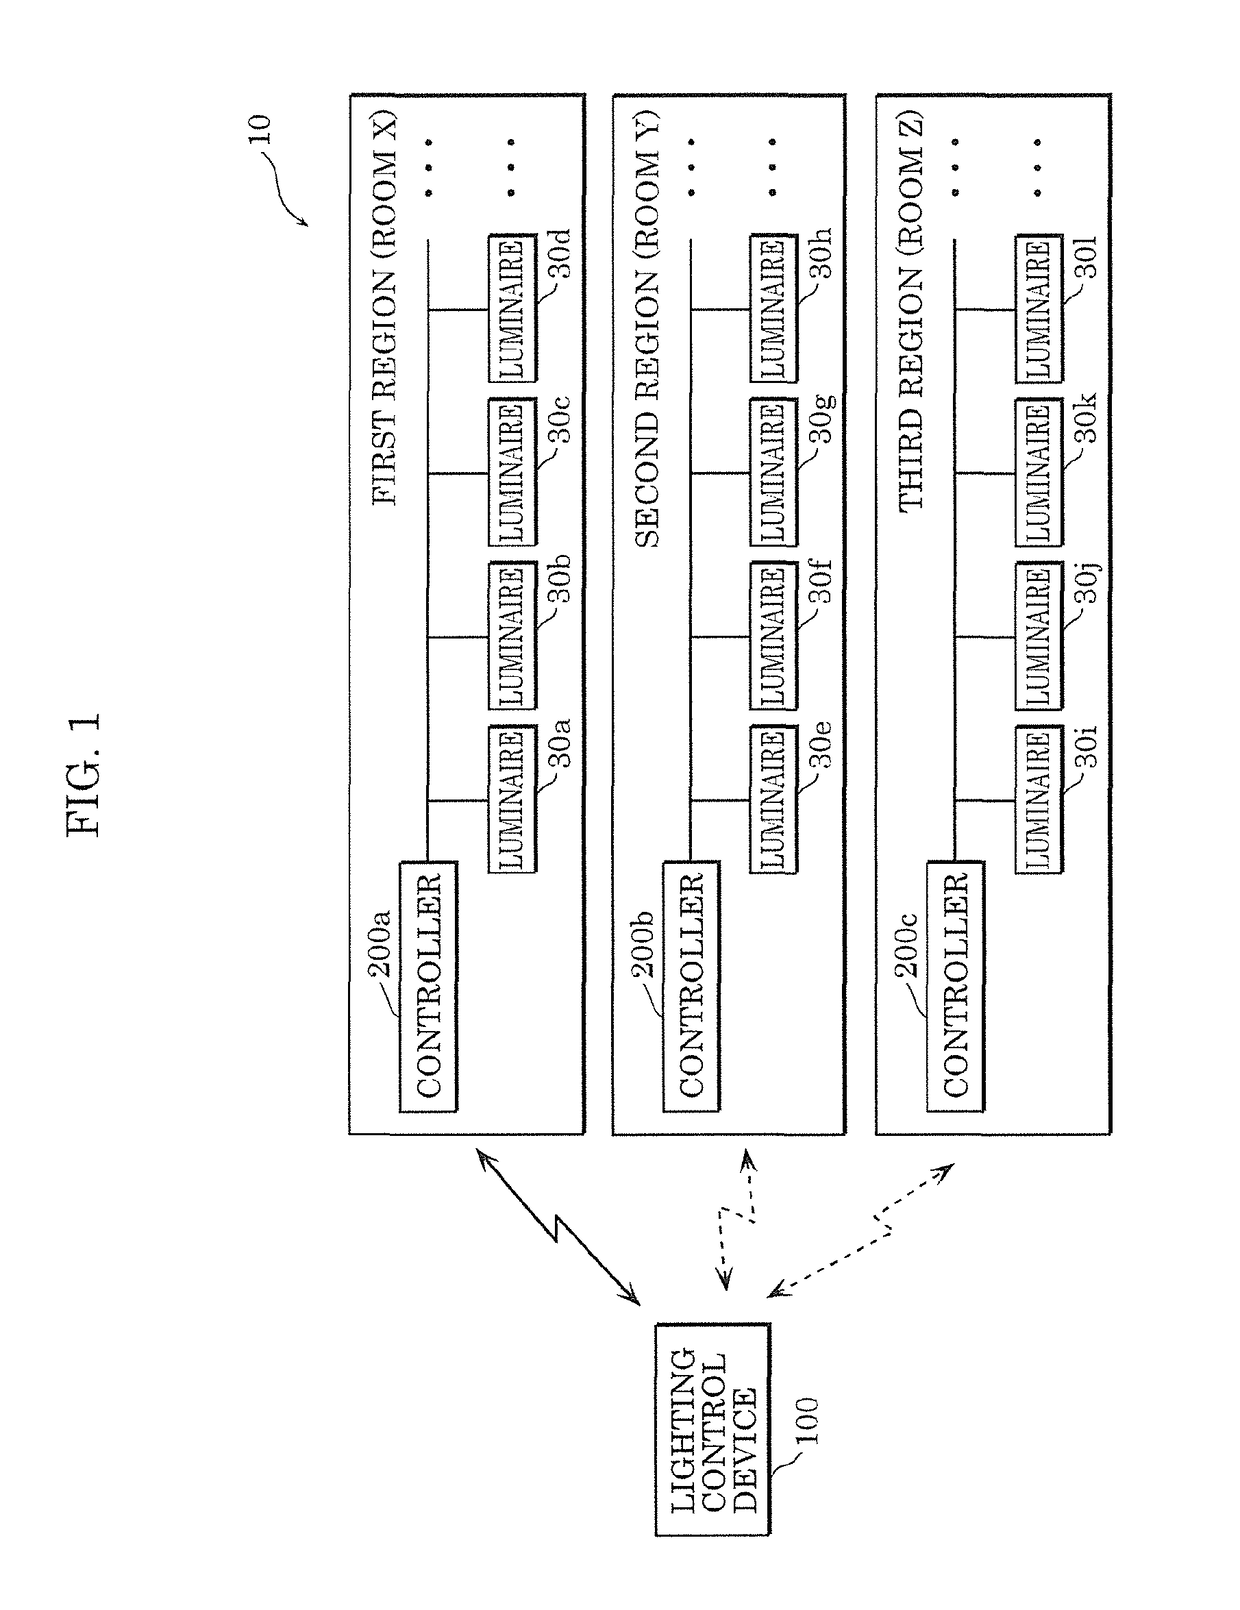 Lighting control device, lighting control system, lighting control method, and non-transitory computer-readable recording medium